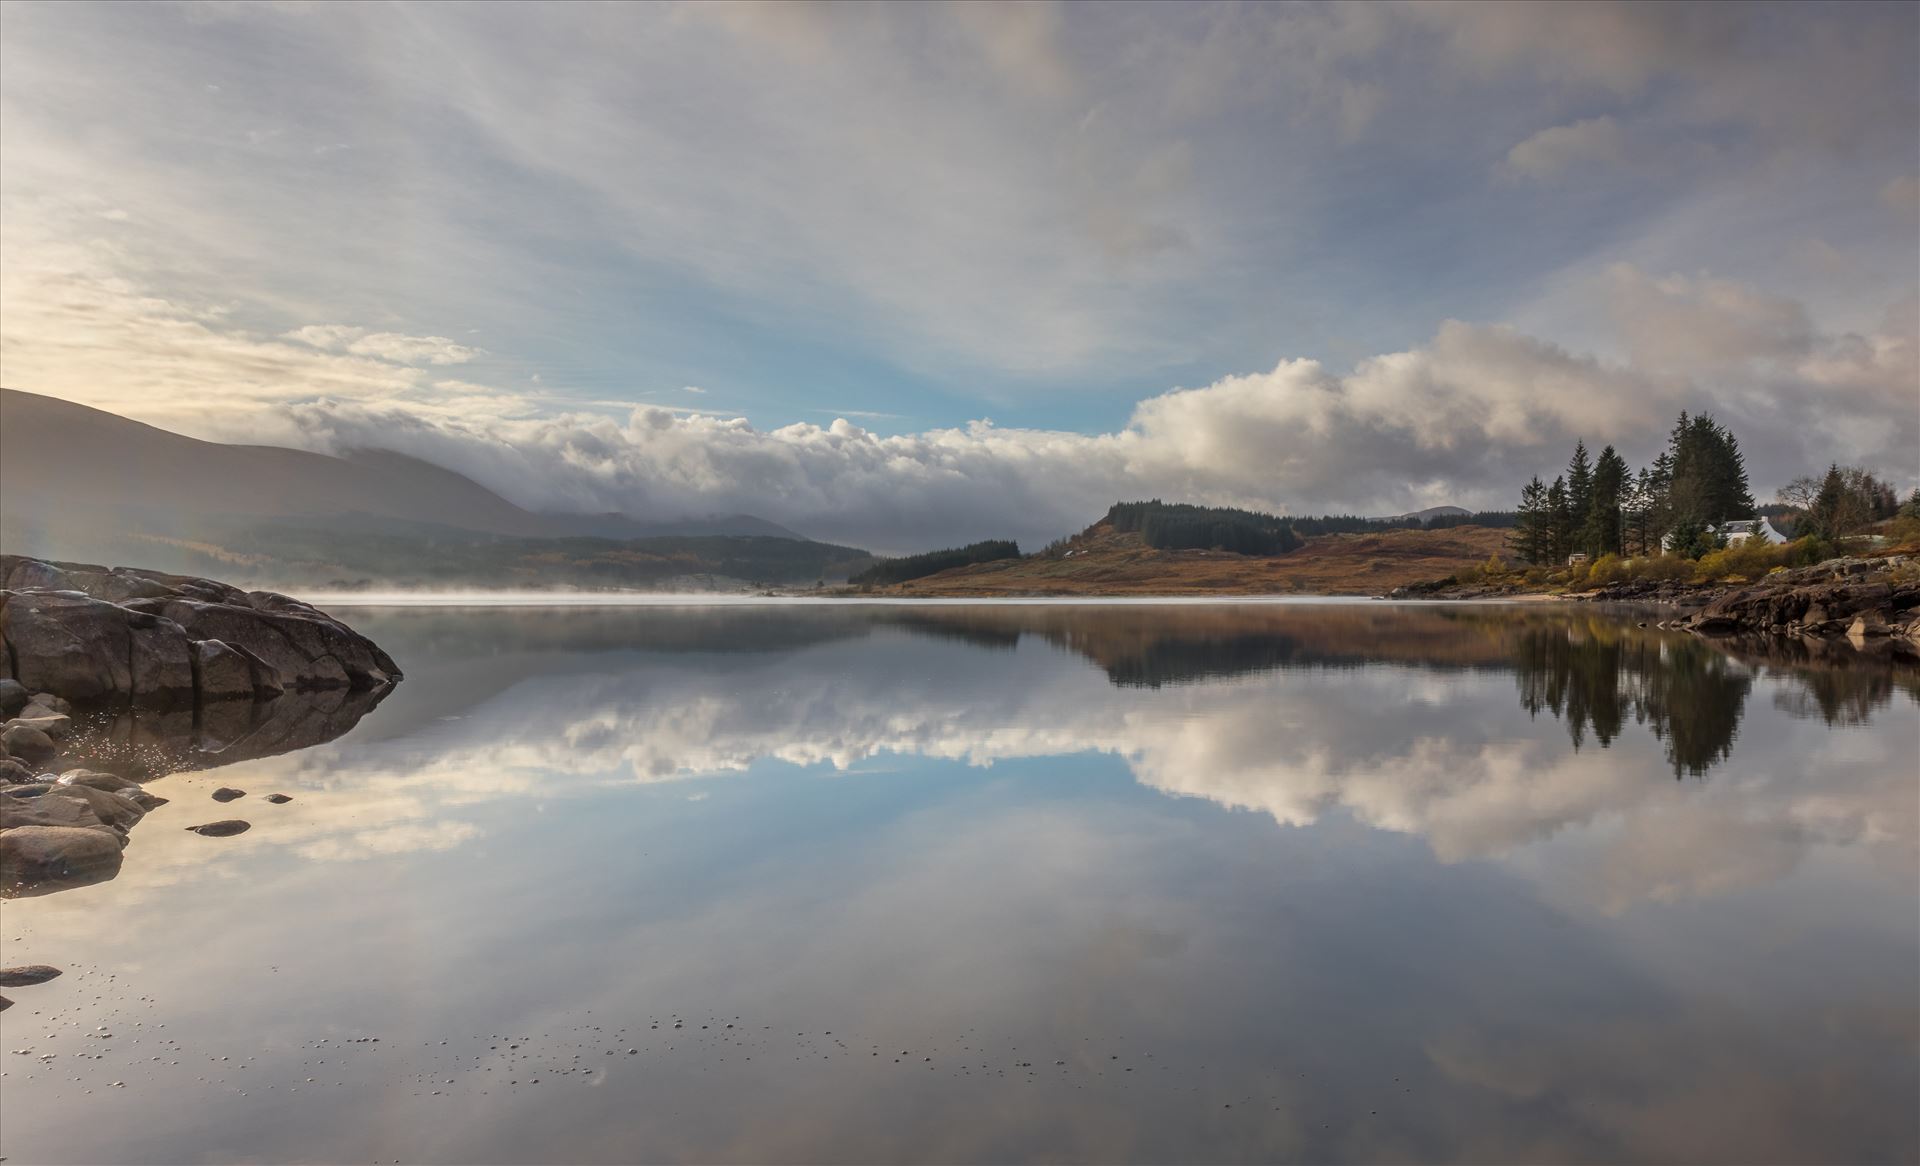 Loch Doon in the Galloway Forest Early morning mist and reflections in Loch Doon in the Galloway Forest in South West Scotland. by Tony Keogh Photography